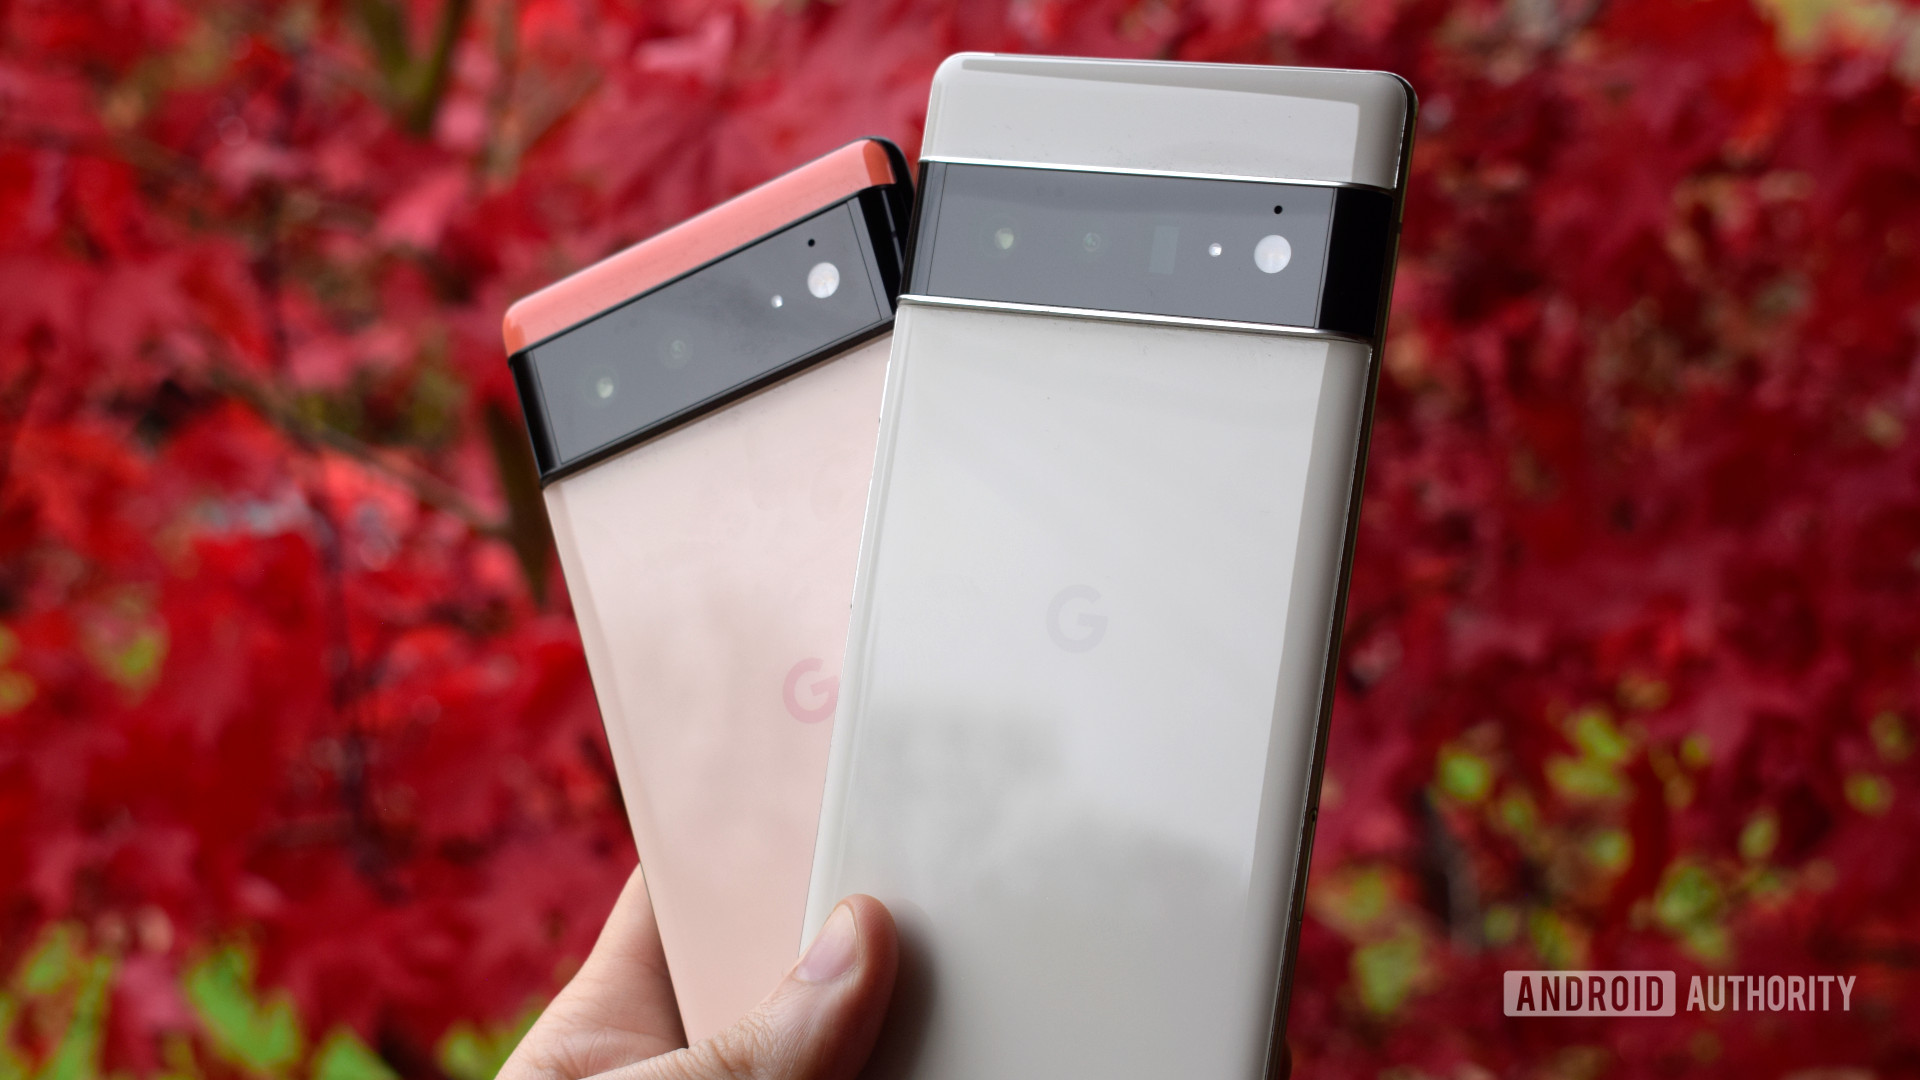 Google Pixel 6 and Pixel 6 Pro on a red leaf background